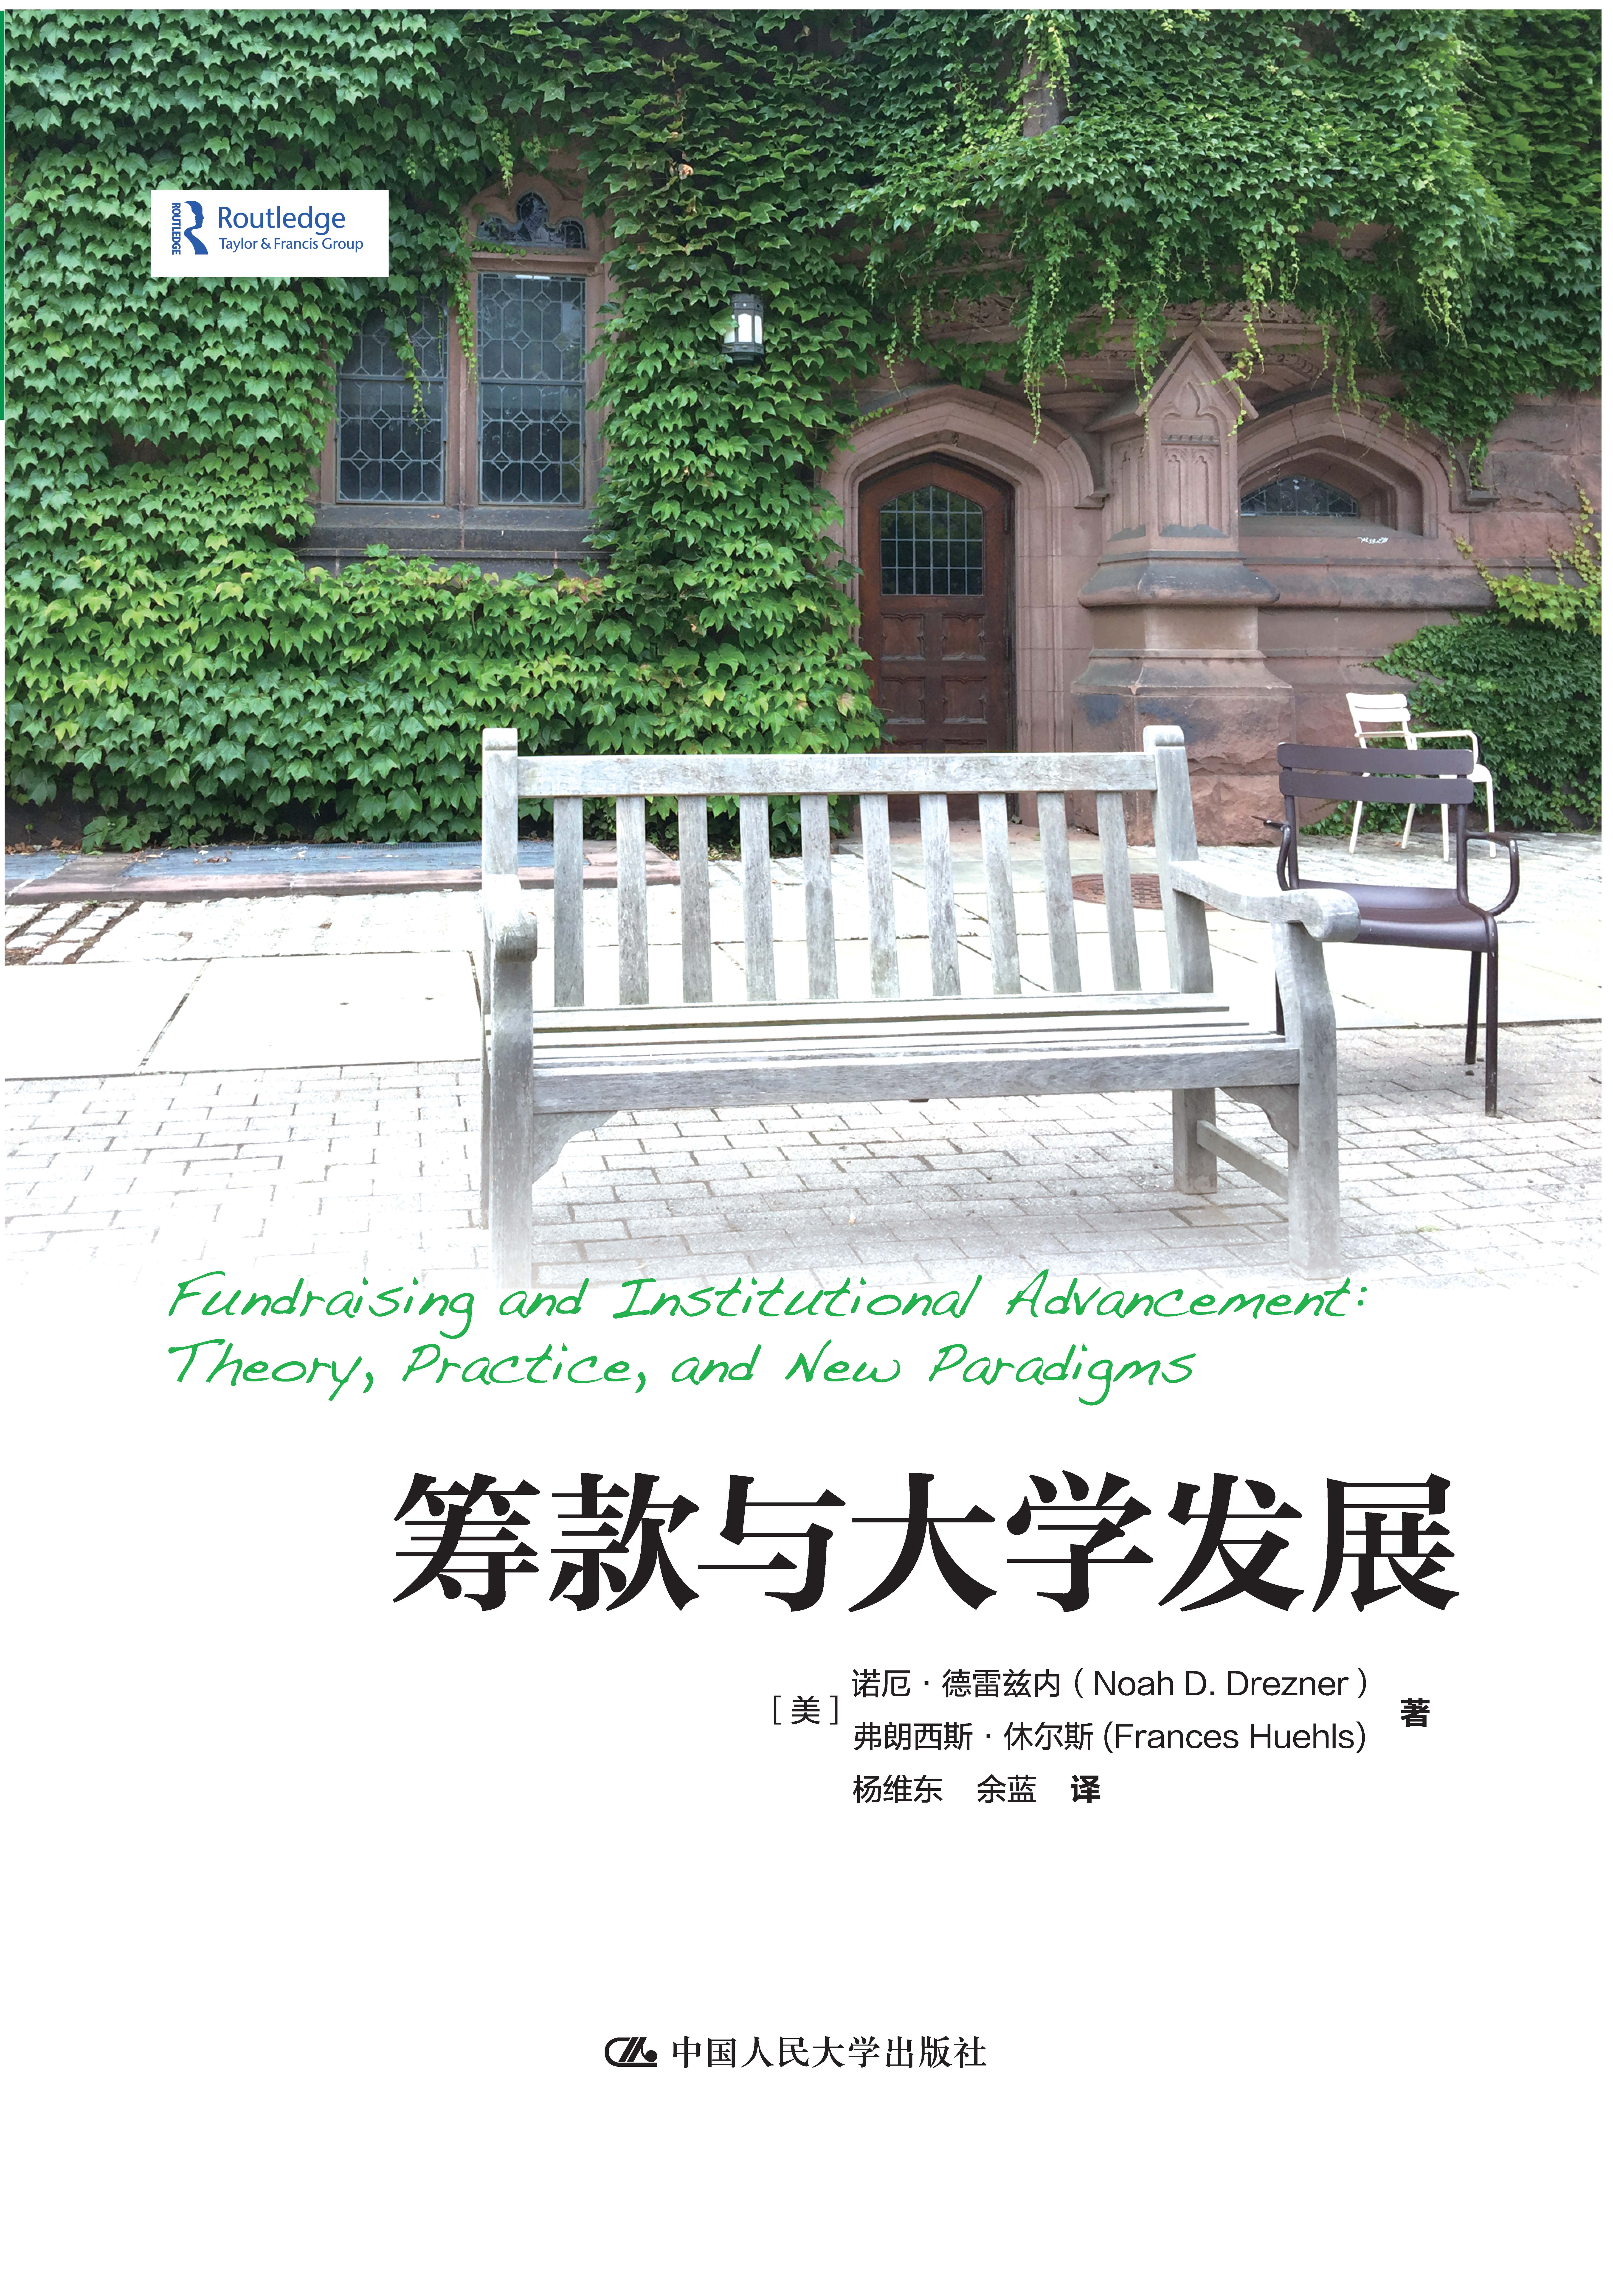 Chinese Cover of Drezner and Huehls 2019